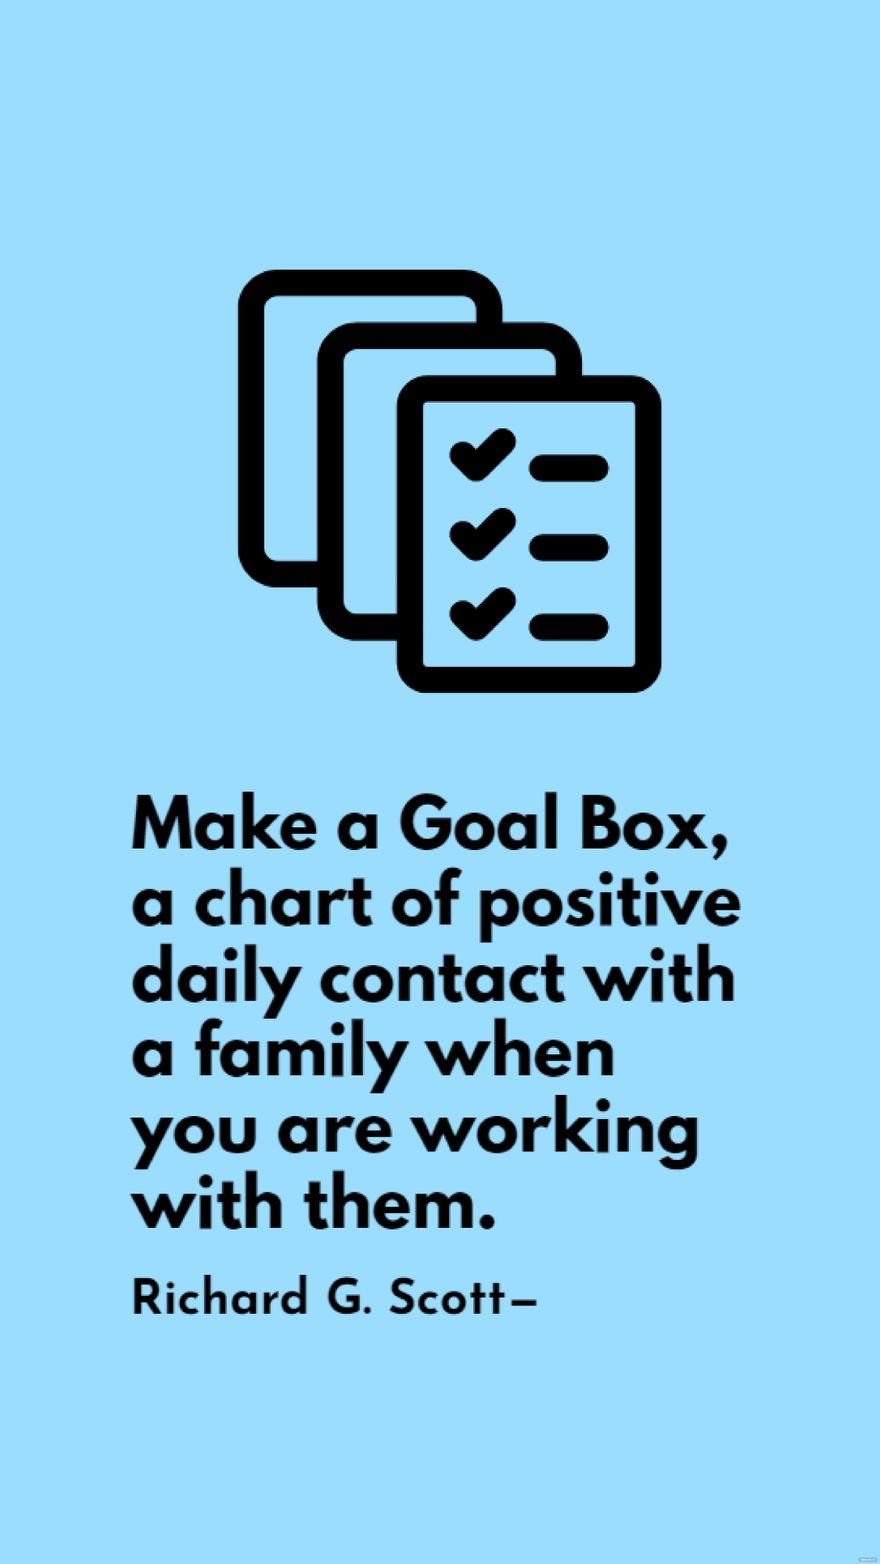 Free Richard G. Scott - Make a Goal Box, a chart of positive daily contact with a family when you are working with them. in JPG